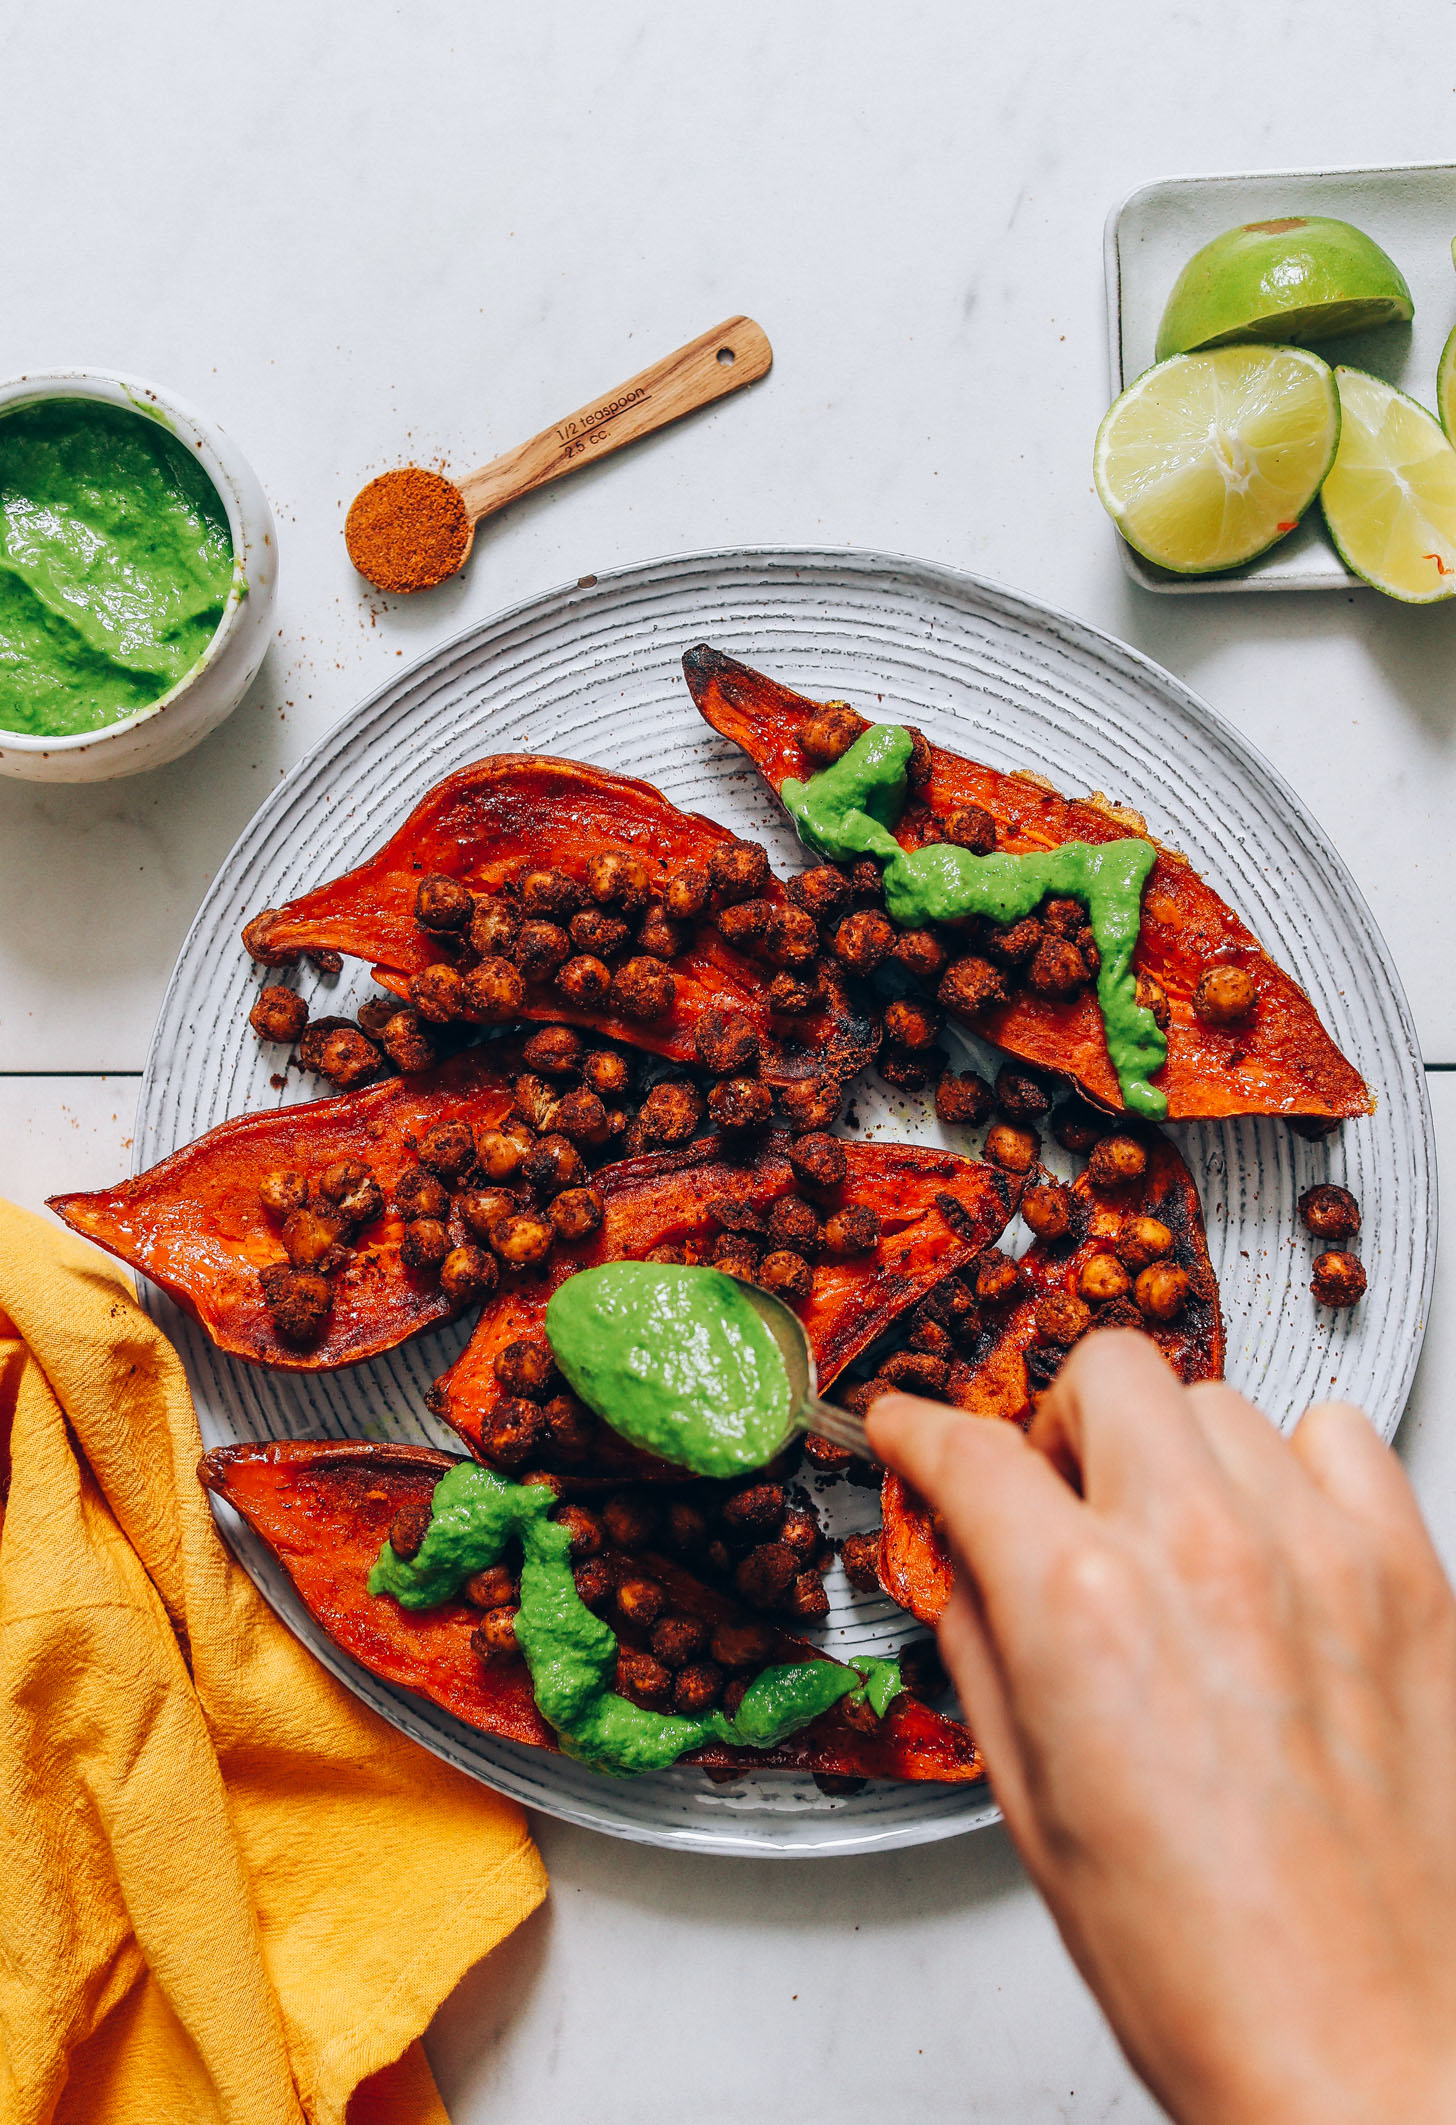 Using a spoon to drizzle green chutney over roasted sweet potatoes and chickpeas